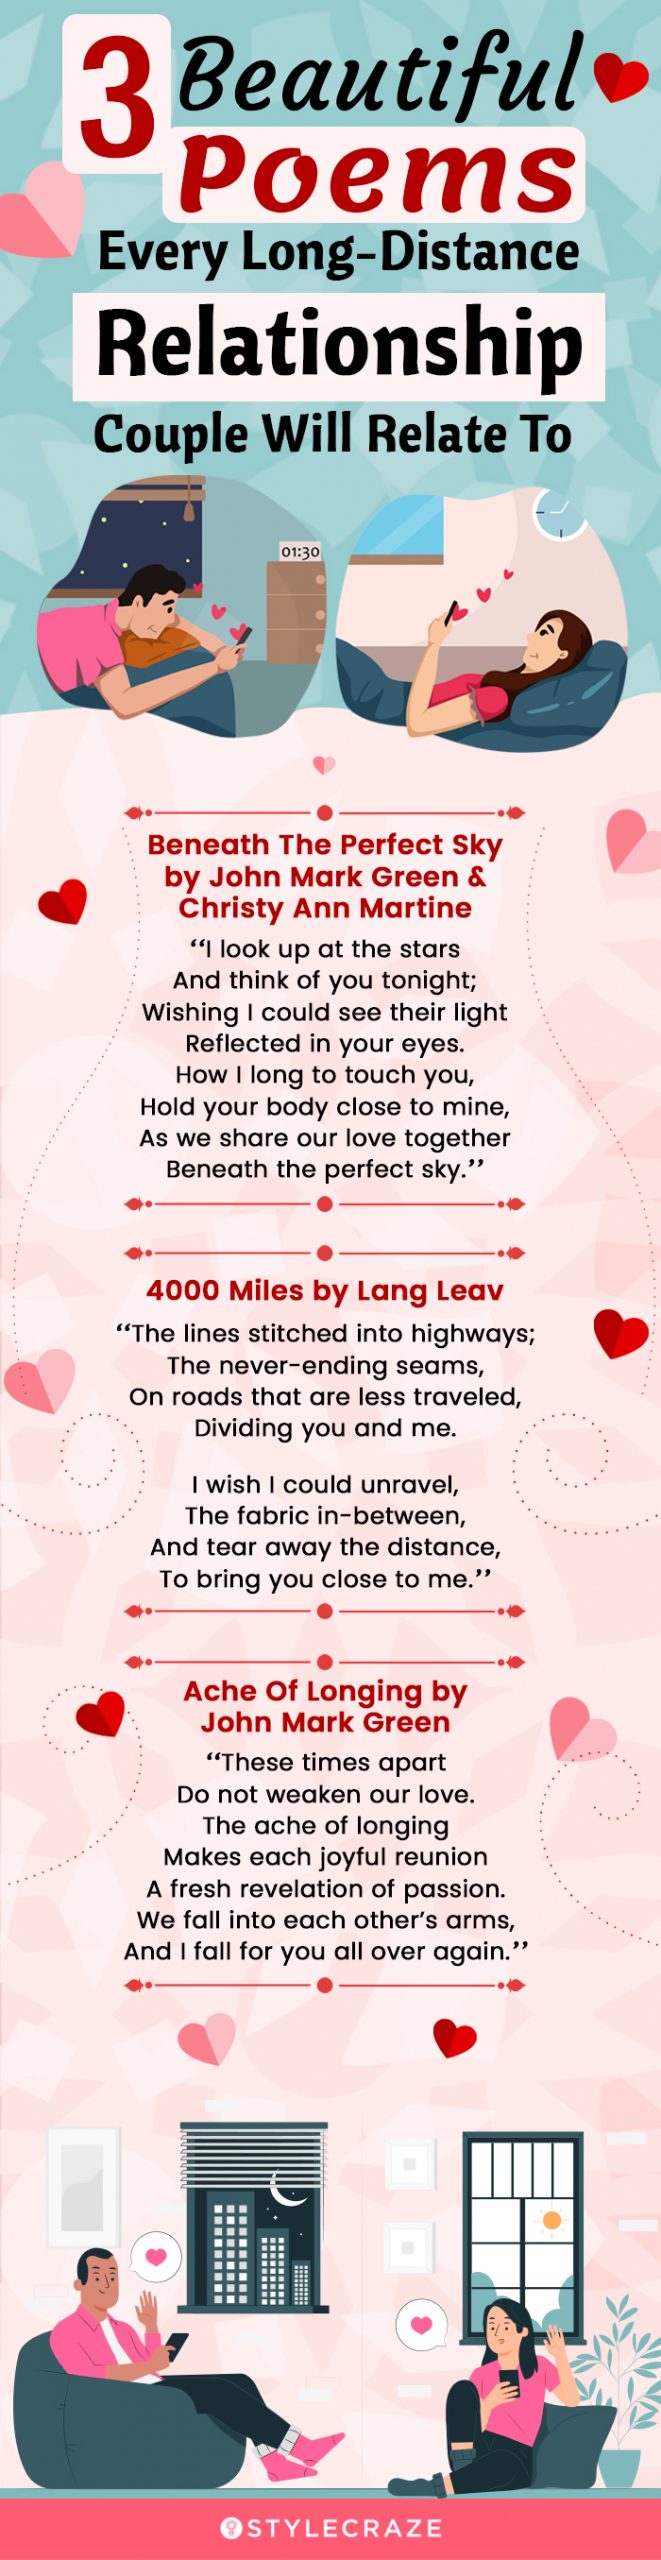 3 beautiful poems every long-distance relationship couple will relate to [infographic]